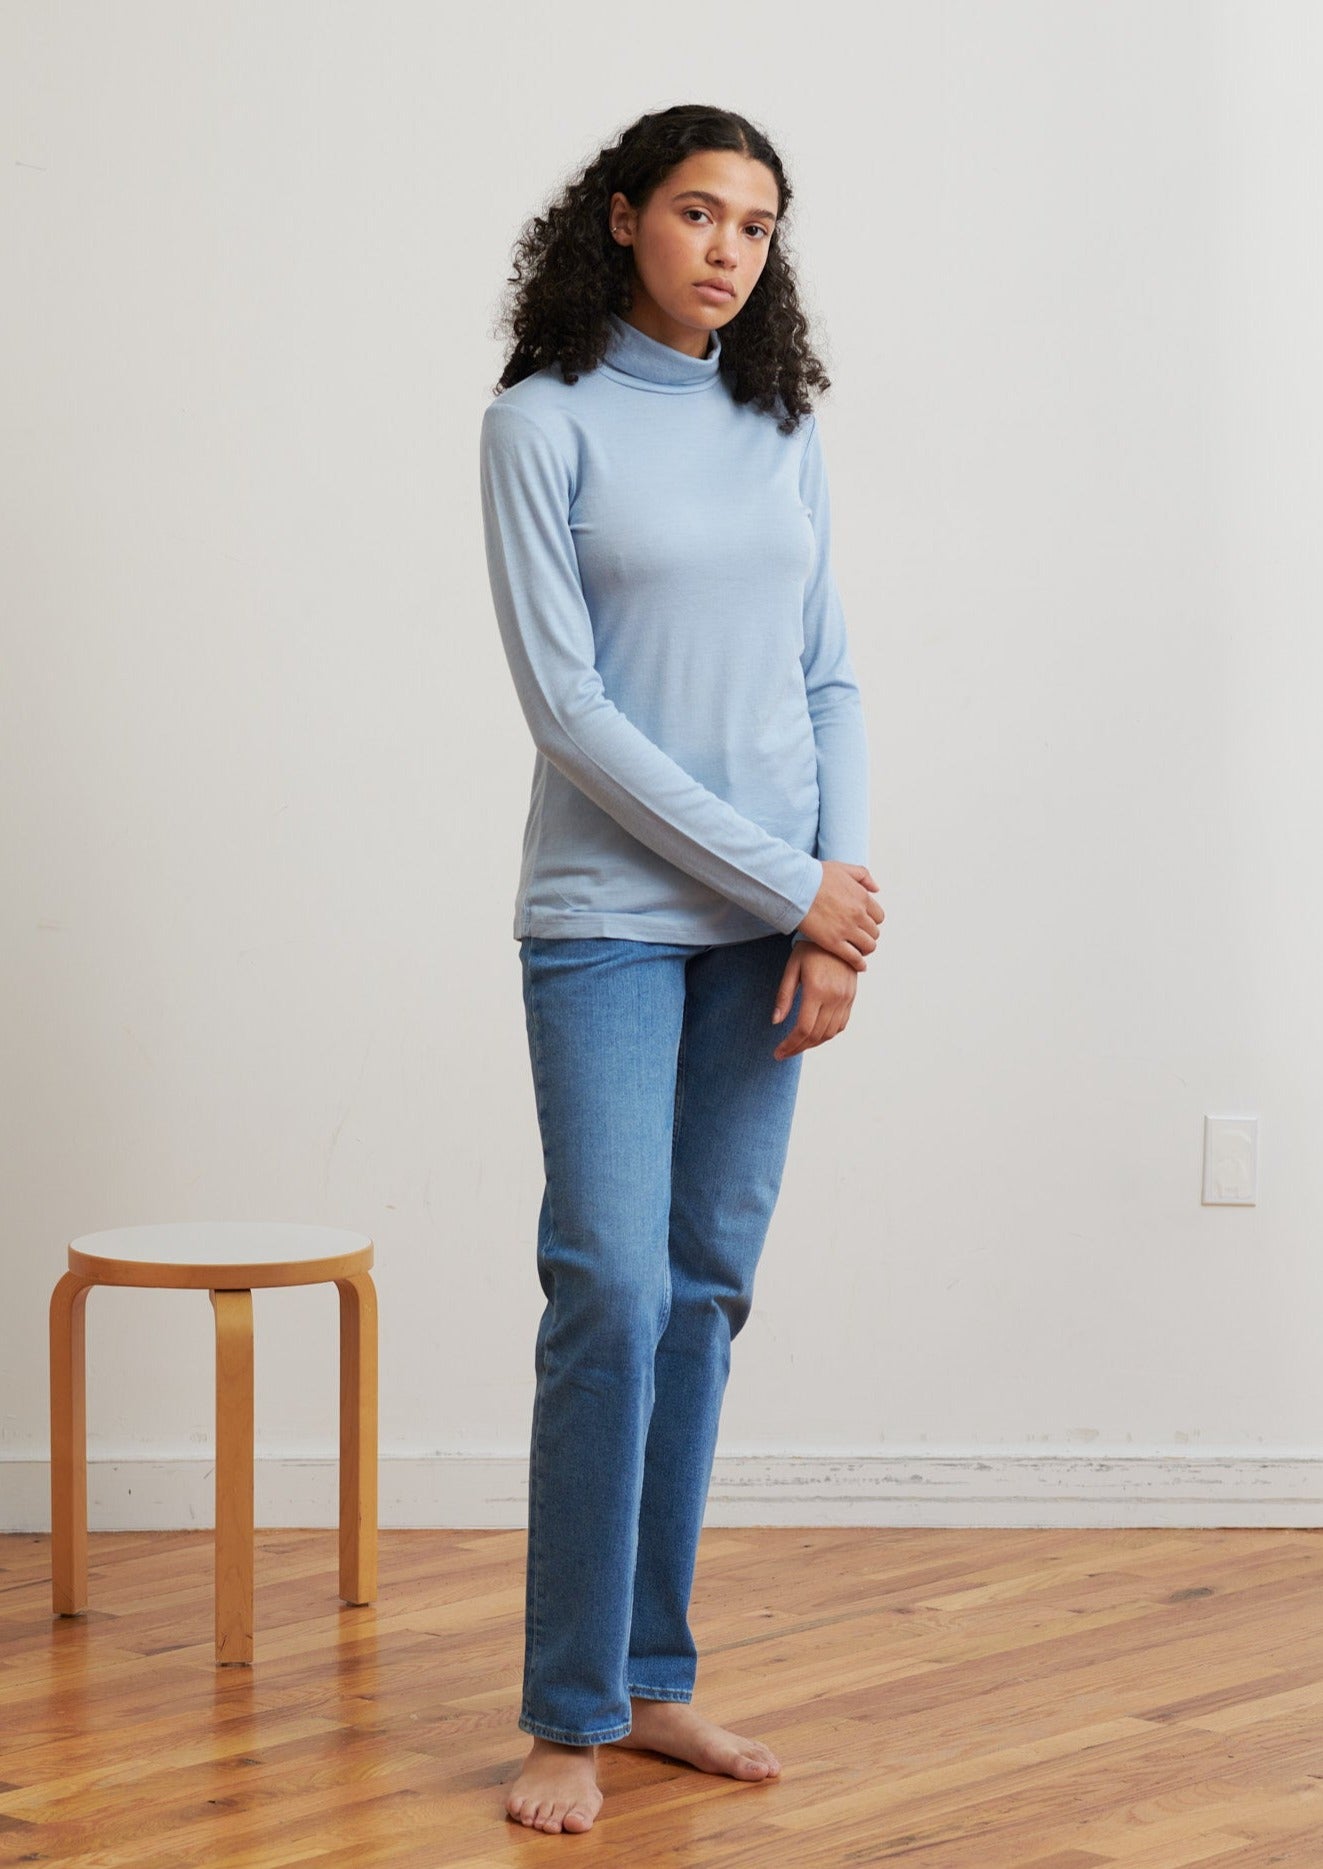 A timeless turtleneck, this layering piece in ethical merino wool is soft and breathable and designed for comfort and versatility in your everyday life.